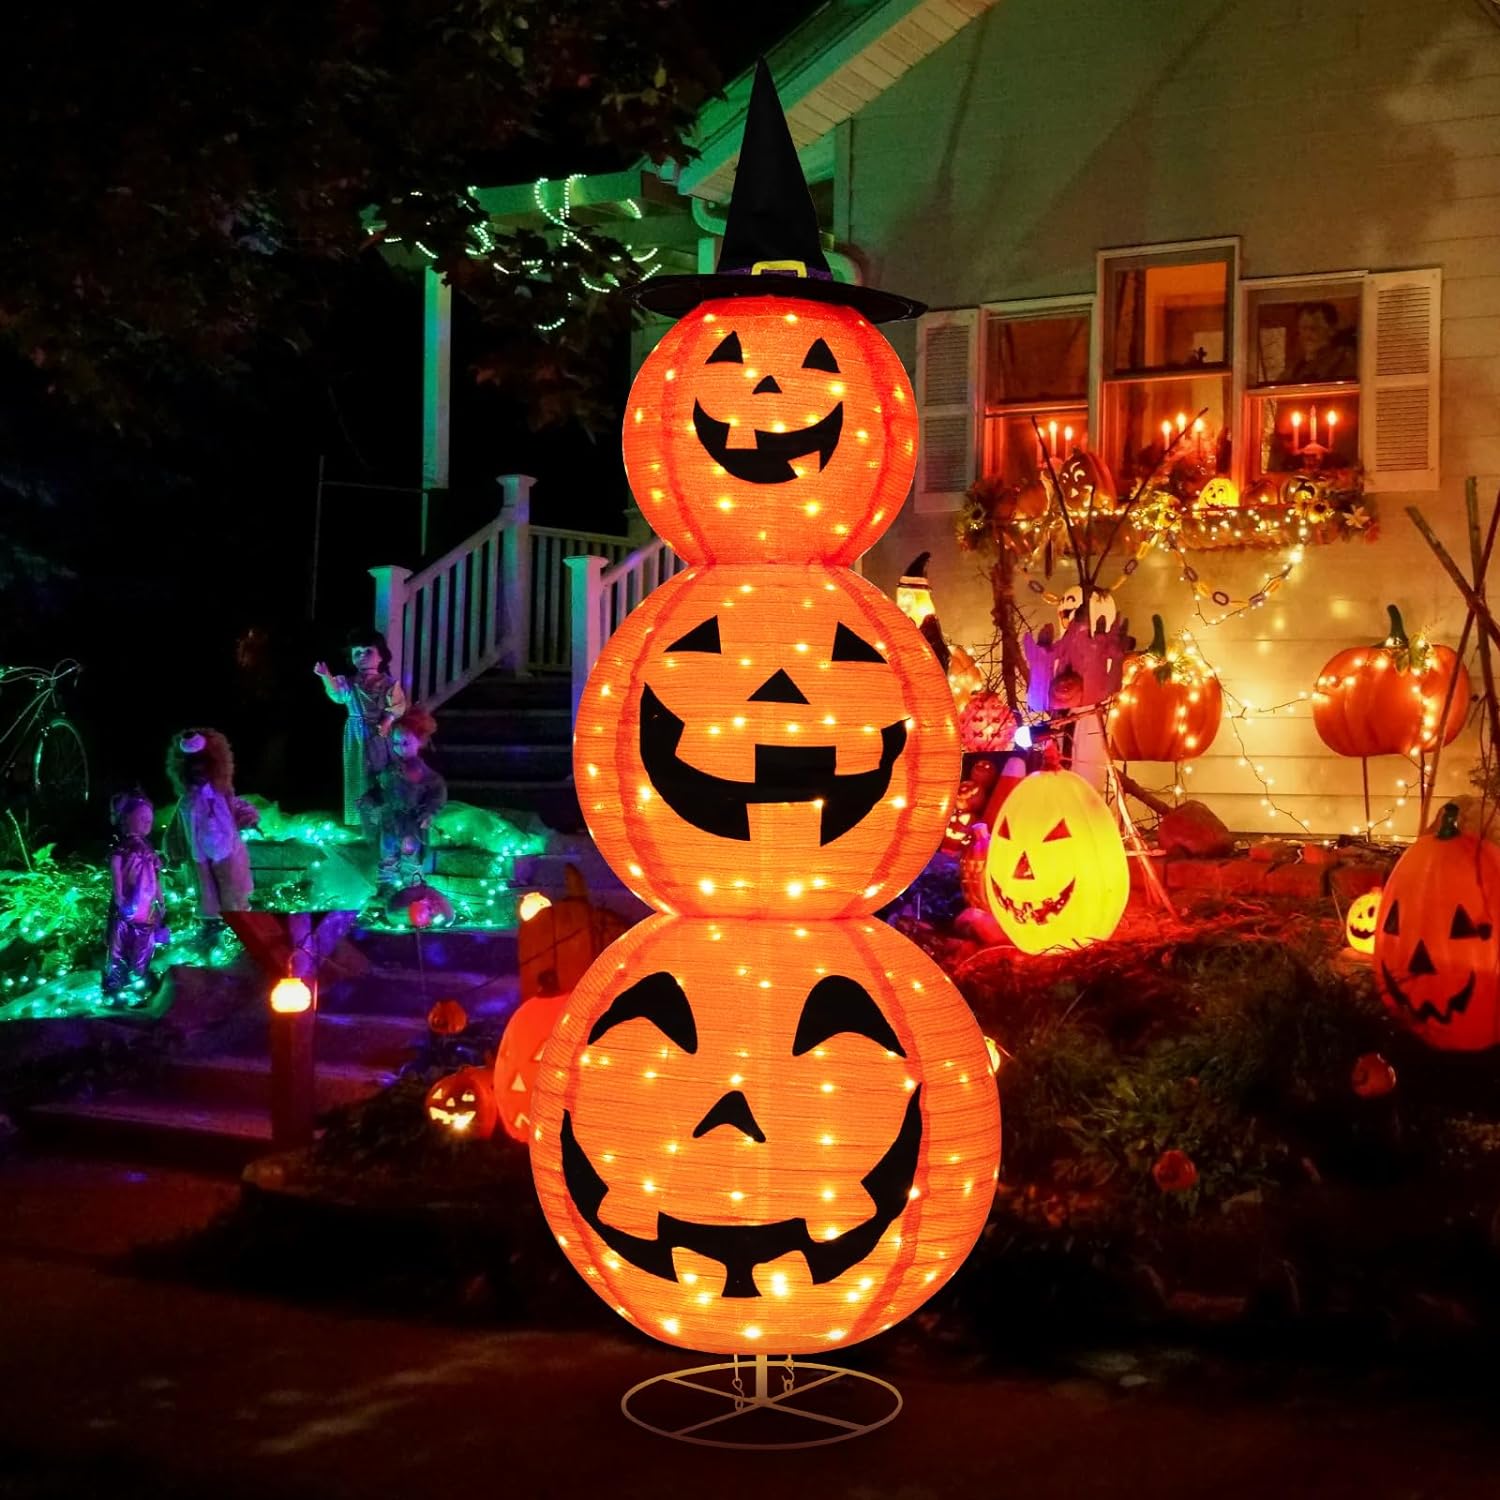 Tangkula 5 FT Halloween Lighted 3 Stacked Pumpkins, 3 Overlapped Pre-Lit Lighted Pumpkins with Hat, Pop up Jack-o-Lantern with Metal Stand for Indoor, Outdoor, Yard, Party, Home, Holiday Decor